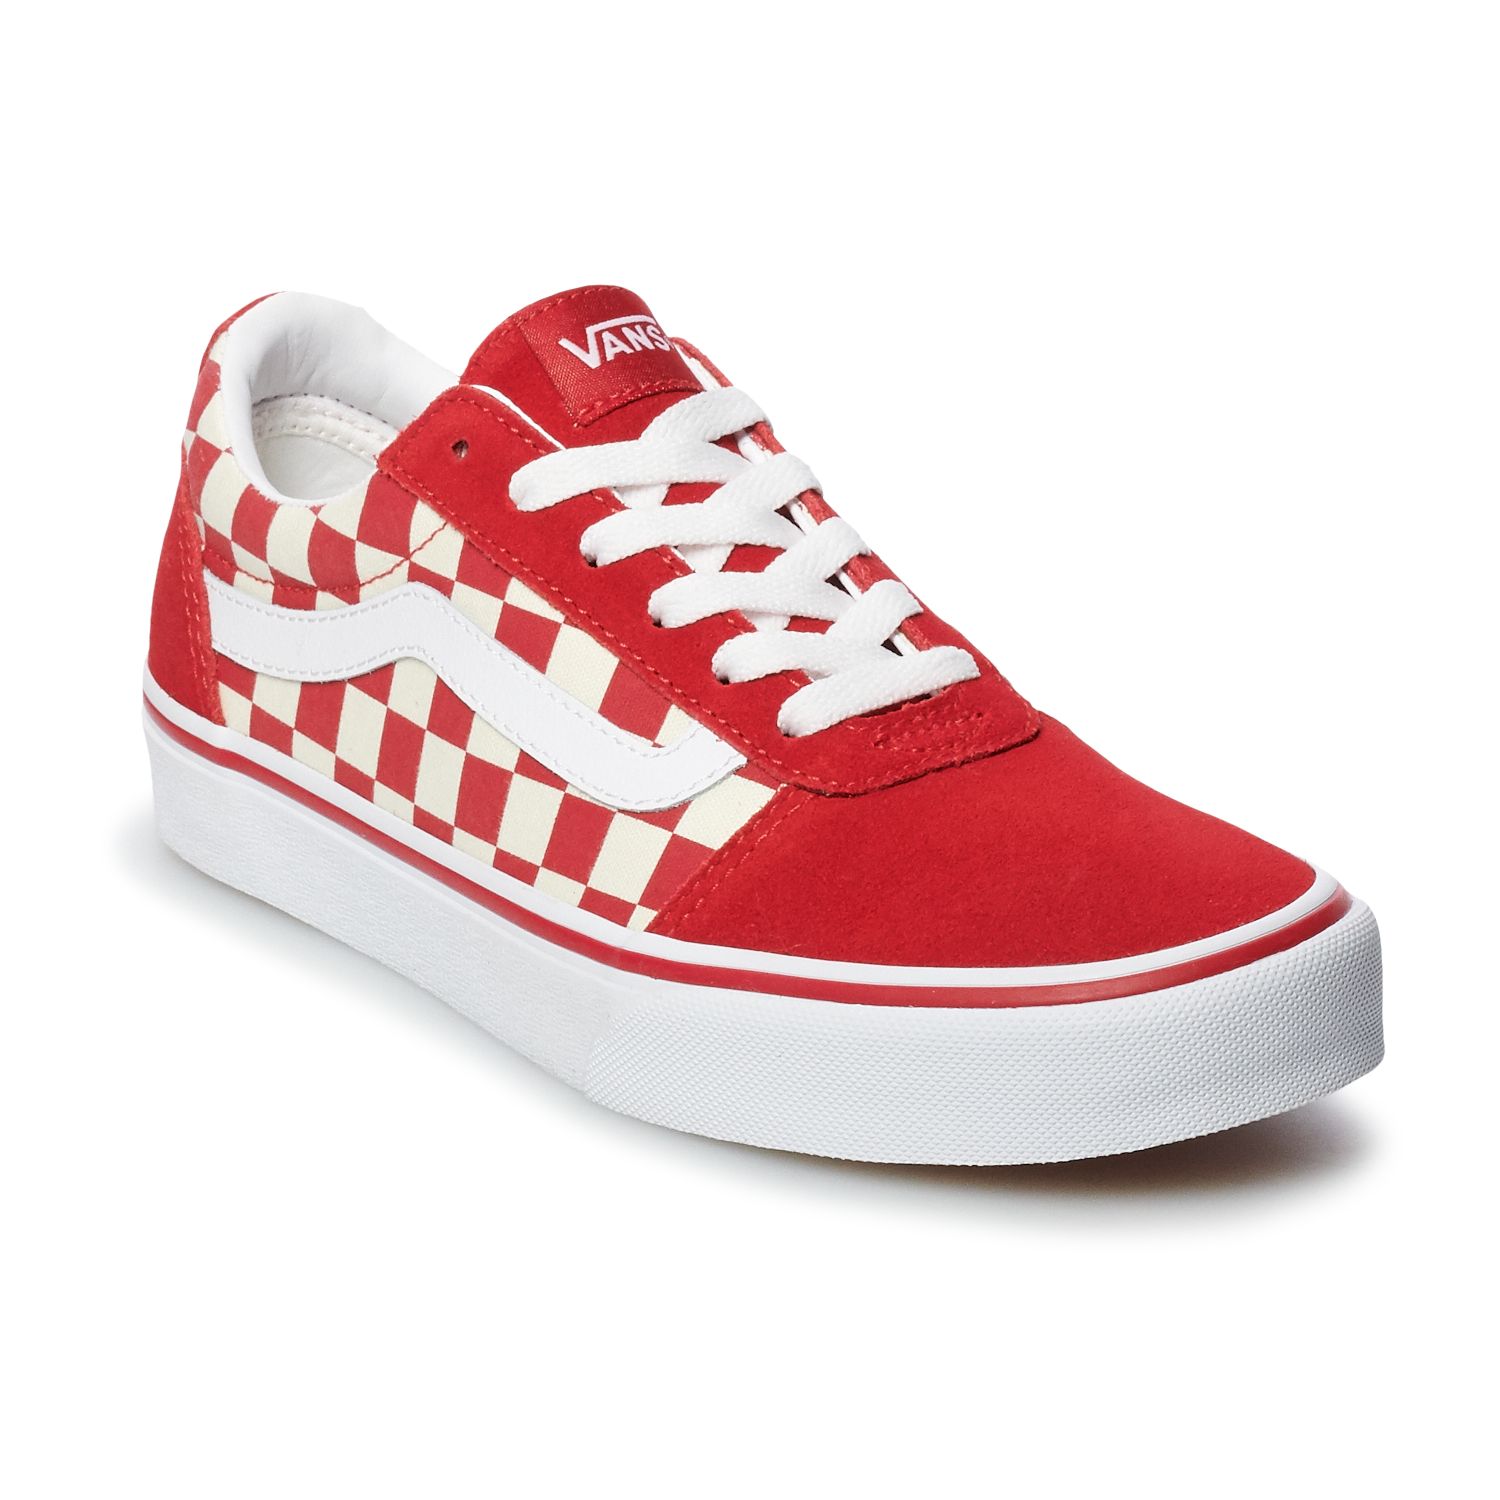 womens red vans size 7.5